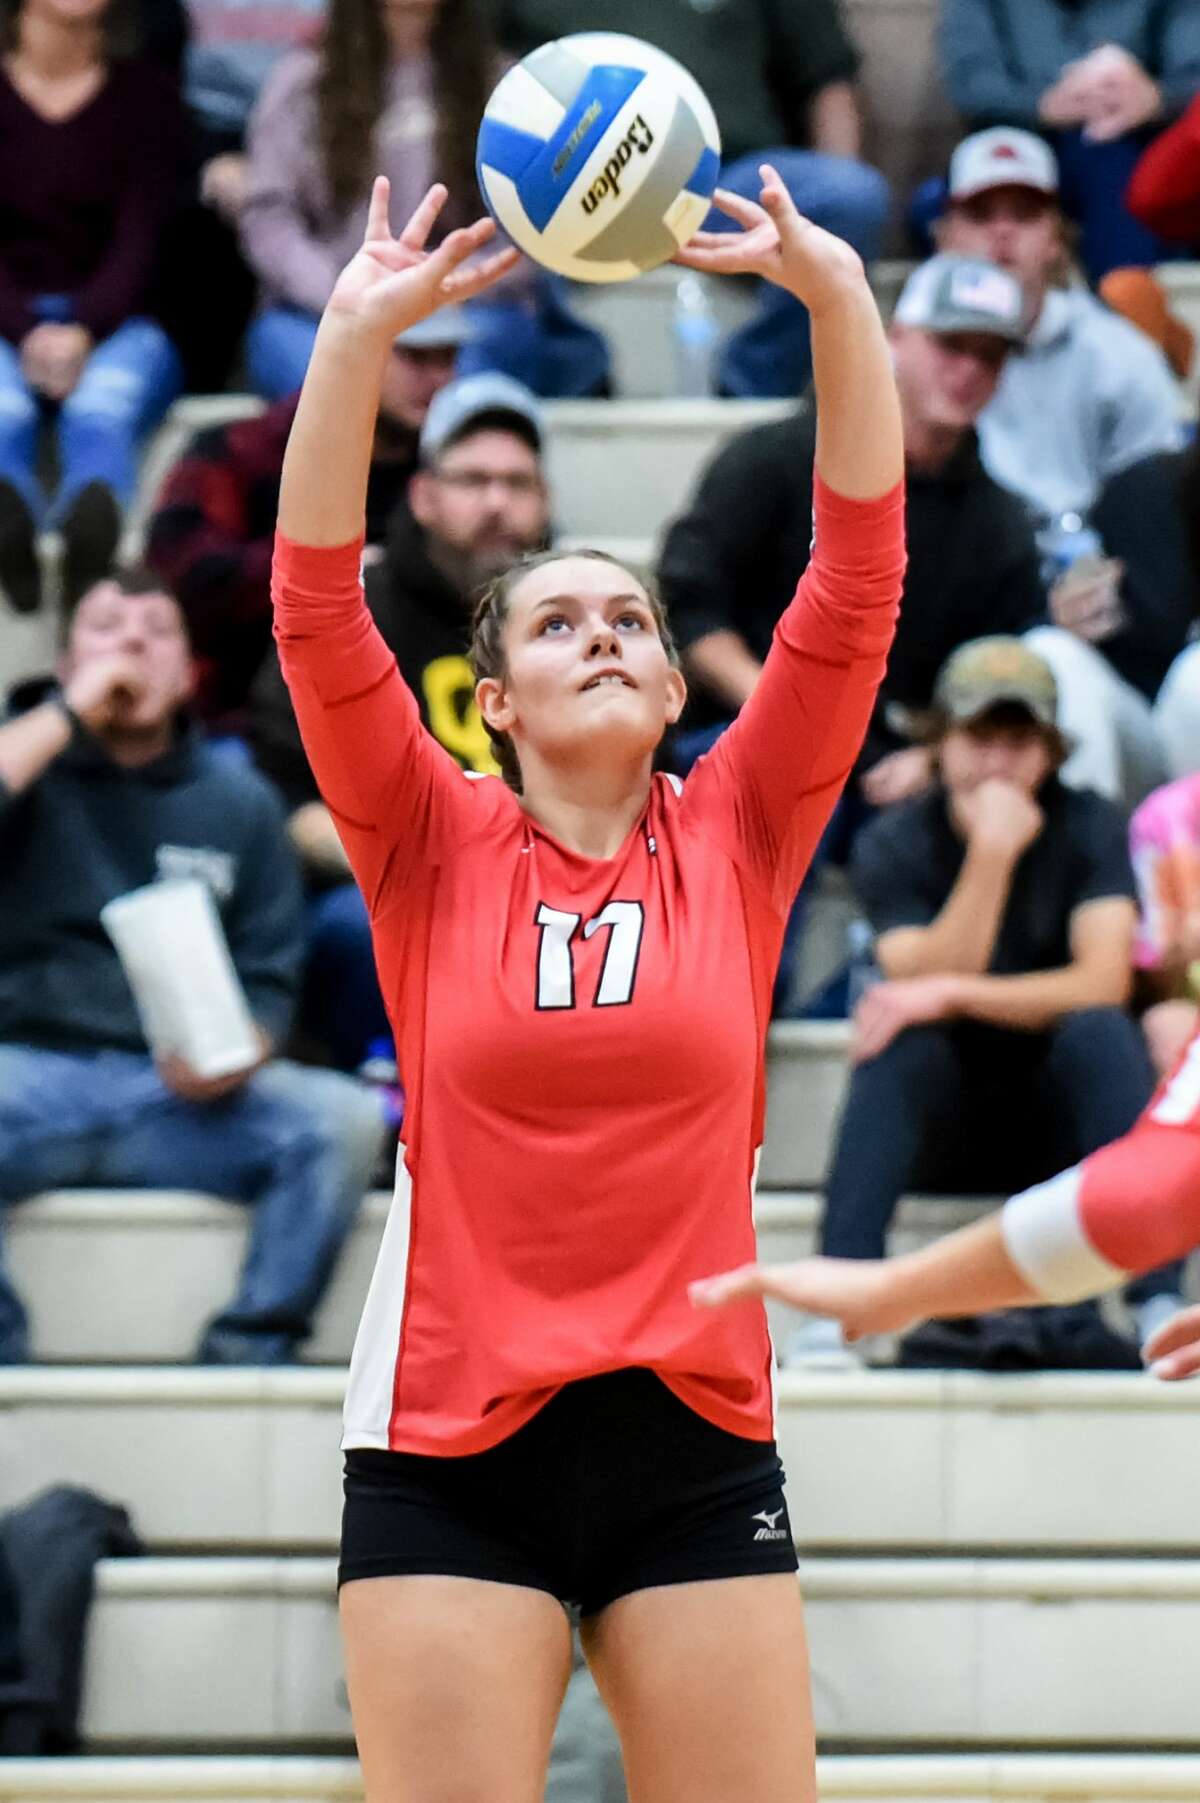 Beaverton's Kaelyn Fischer sets the ball during a match against Clare Wednesday, Sept. 22, 2021 at Beaverton High School. (Adam Ferman/for the Daily News)